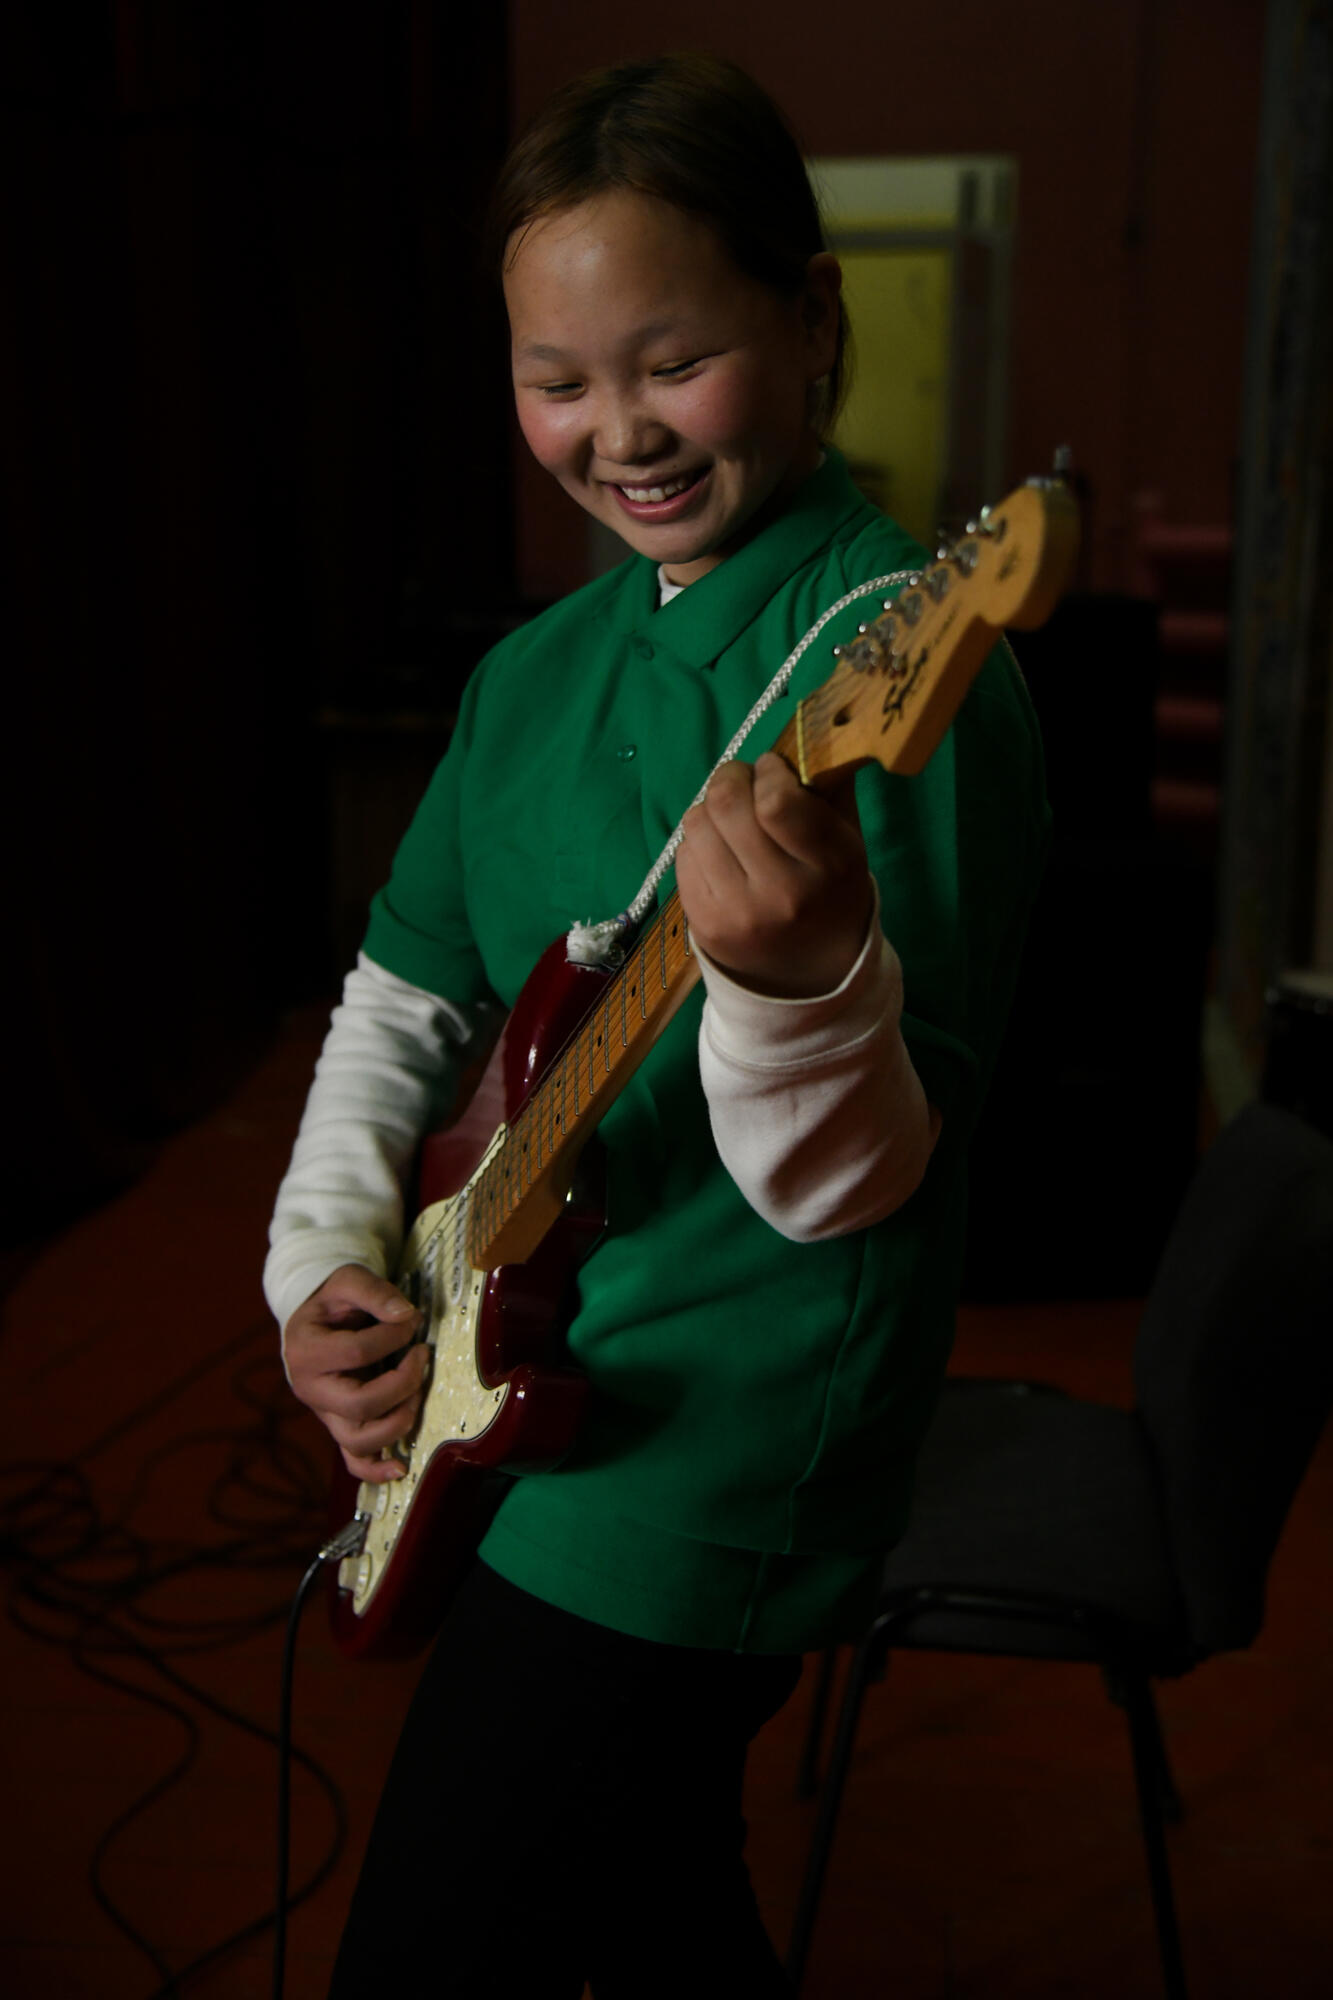 Enkhjin: I wish every child has the freedom to do what they love to do while developing themselves.